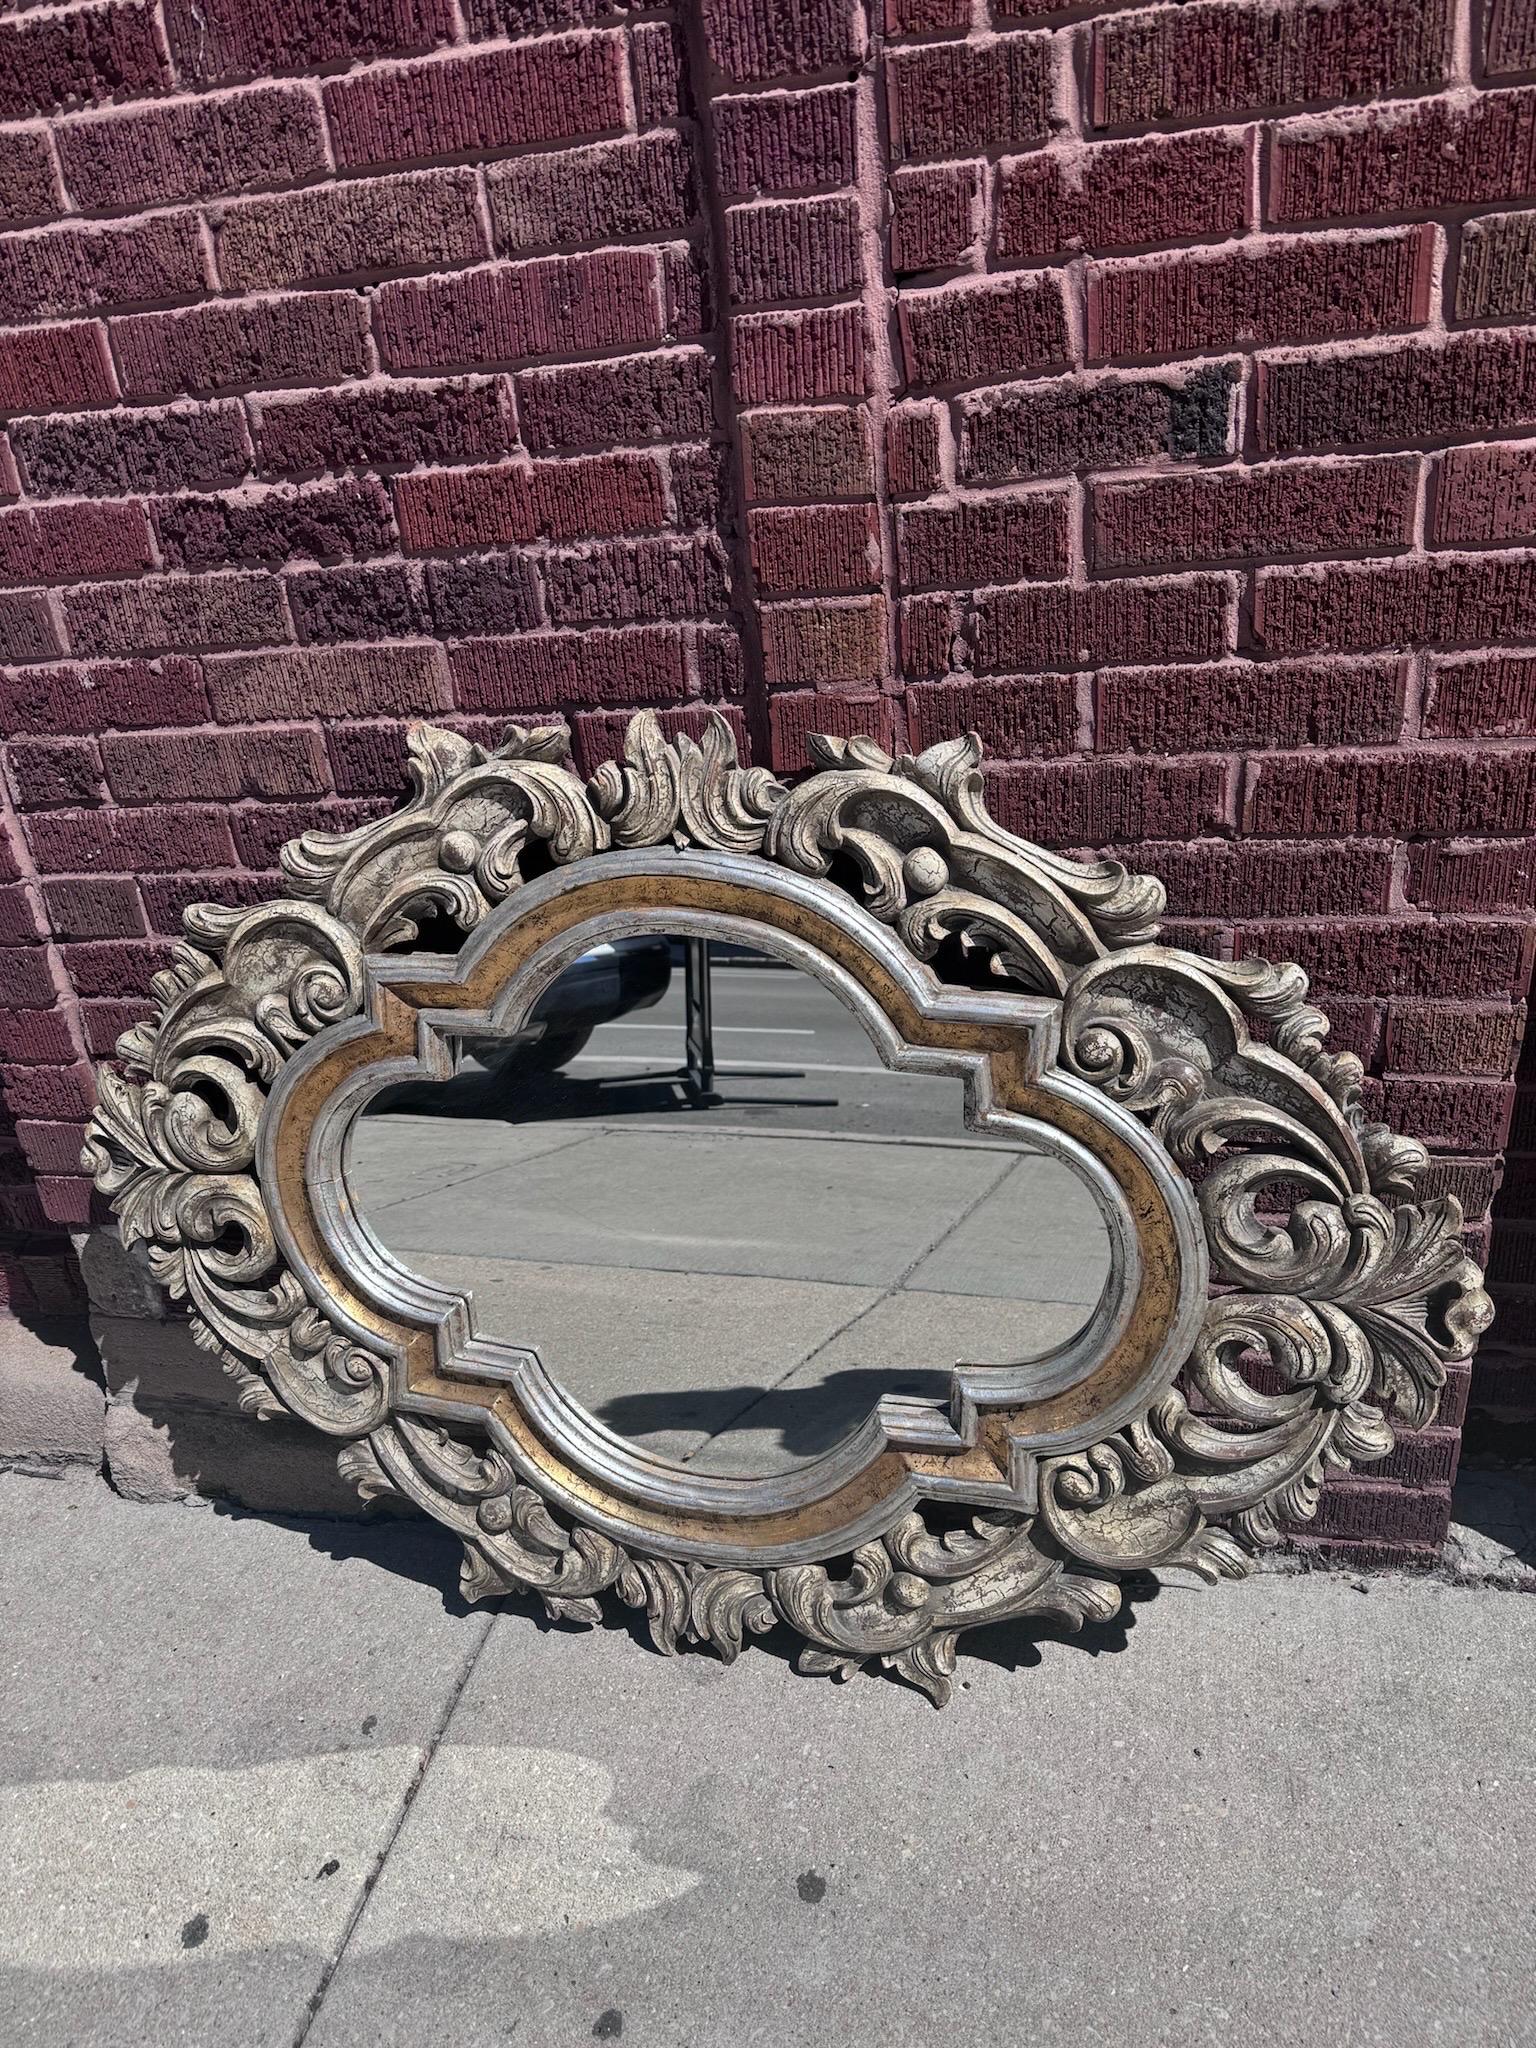 Vintage French Style Ornate Carved Wall Mirror by John Richard

Add a touch of timeless elegance to your home with the Vintage French Style Ornate Carved Wall Mirror by John Richard. This exquisite mirror features intricate scroll work and ornate